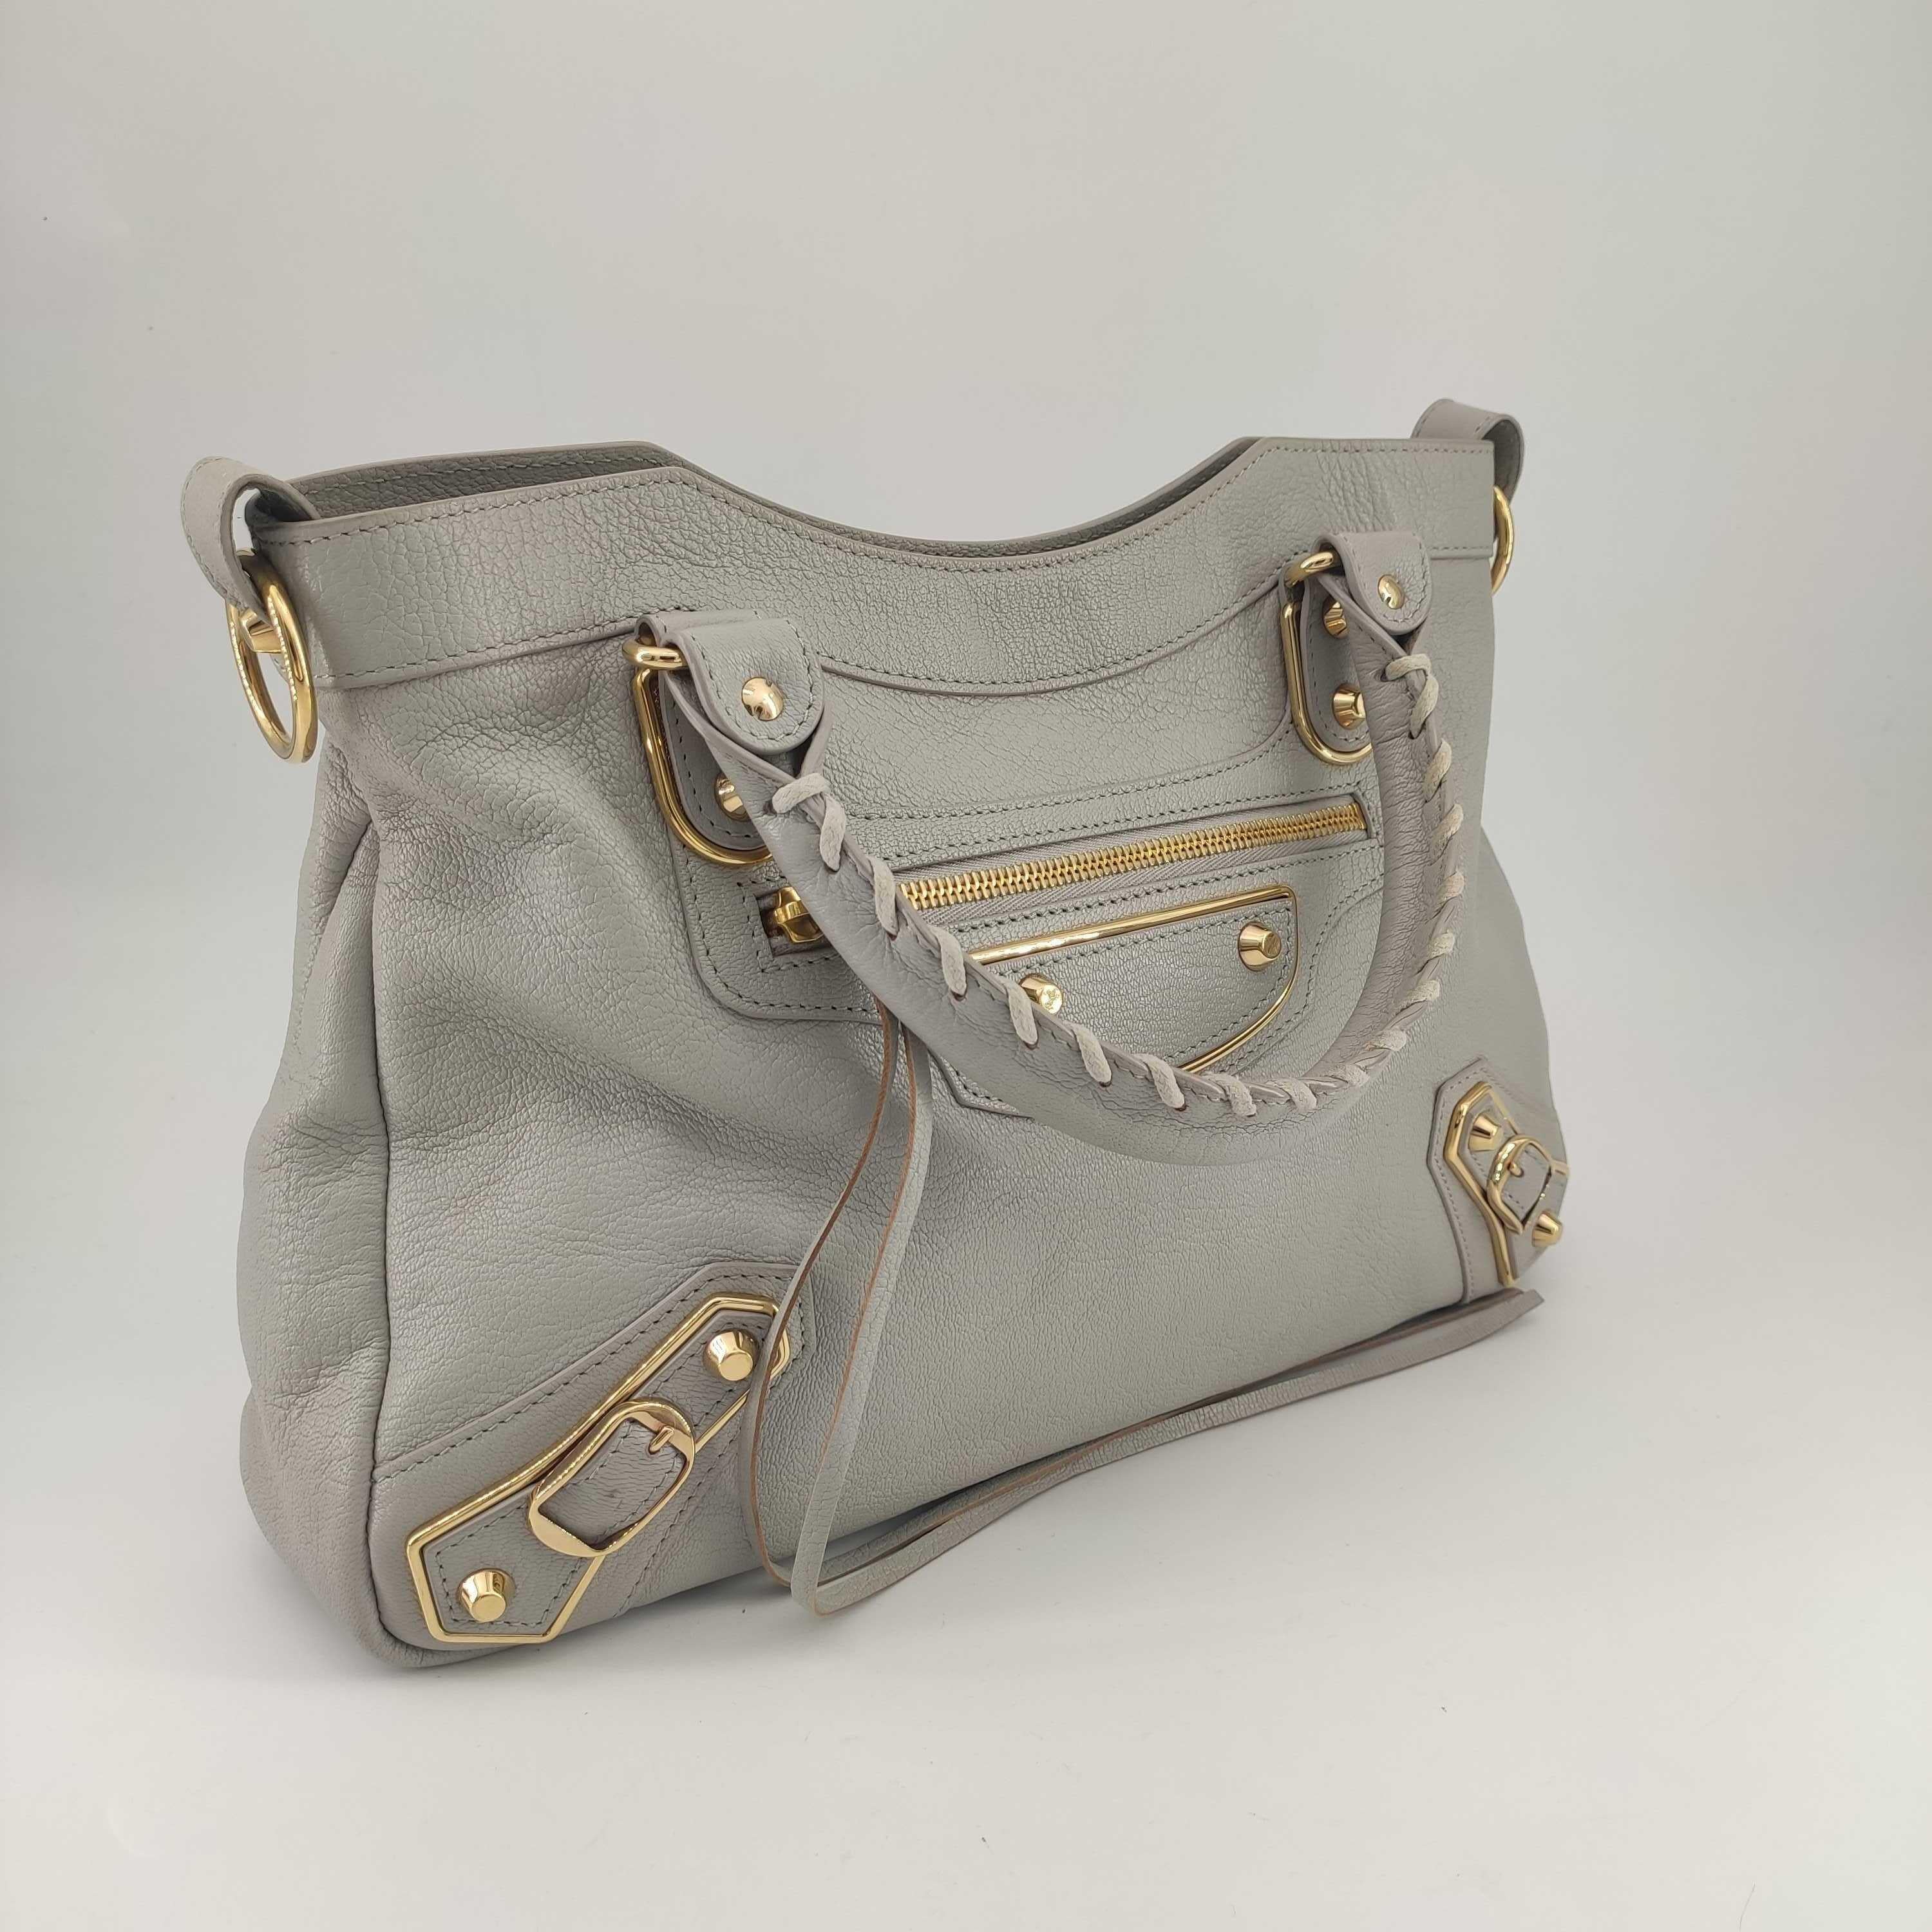 - Designer: BALENCIAGA
- Model: First
- Condition: Very good condition. 
- Accessories: None
- Measurements: Width: 32cm, Height: 23cm, Depth: 7cm, Strap: 58cm
- Exterior Material: Leather
- Exterior Color: Beige
- Interior Material: Cloth
-